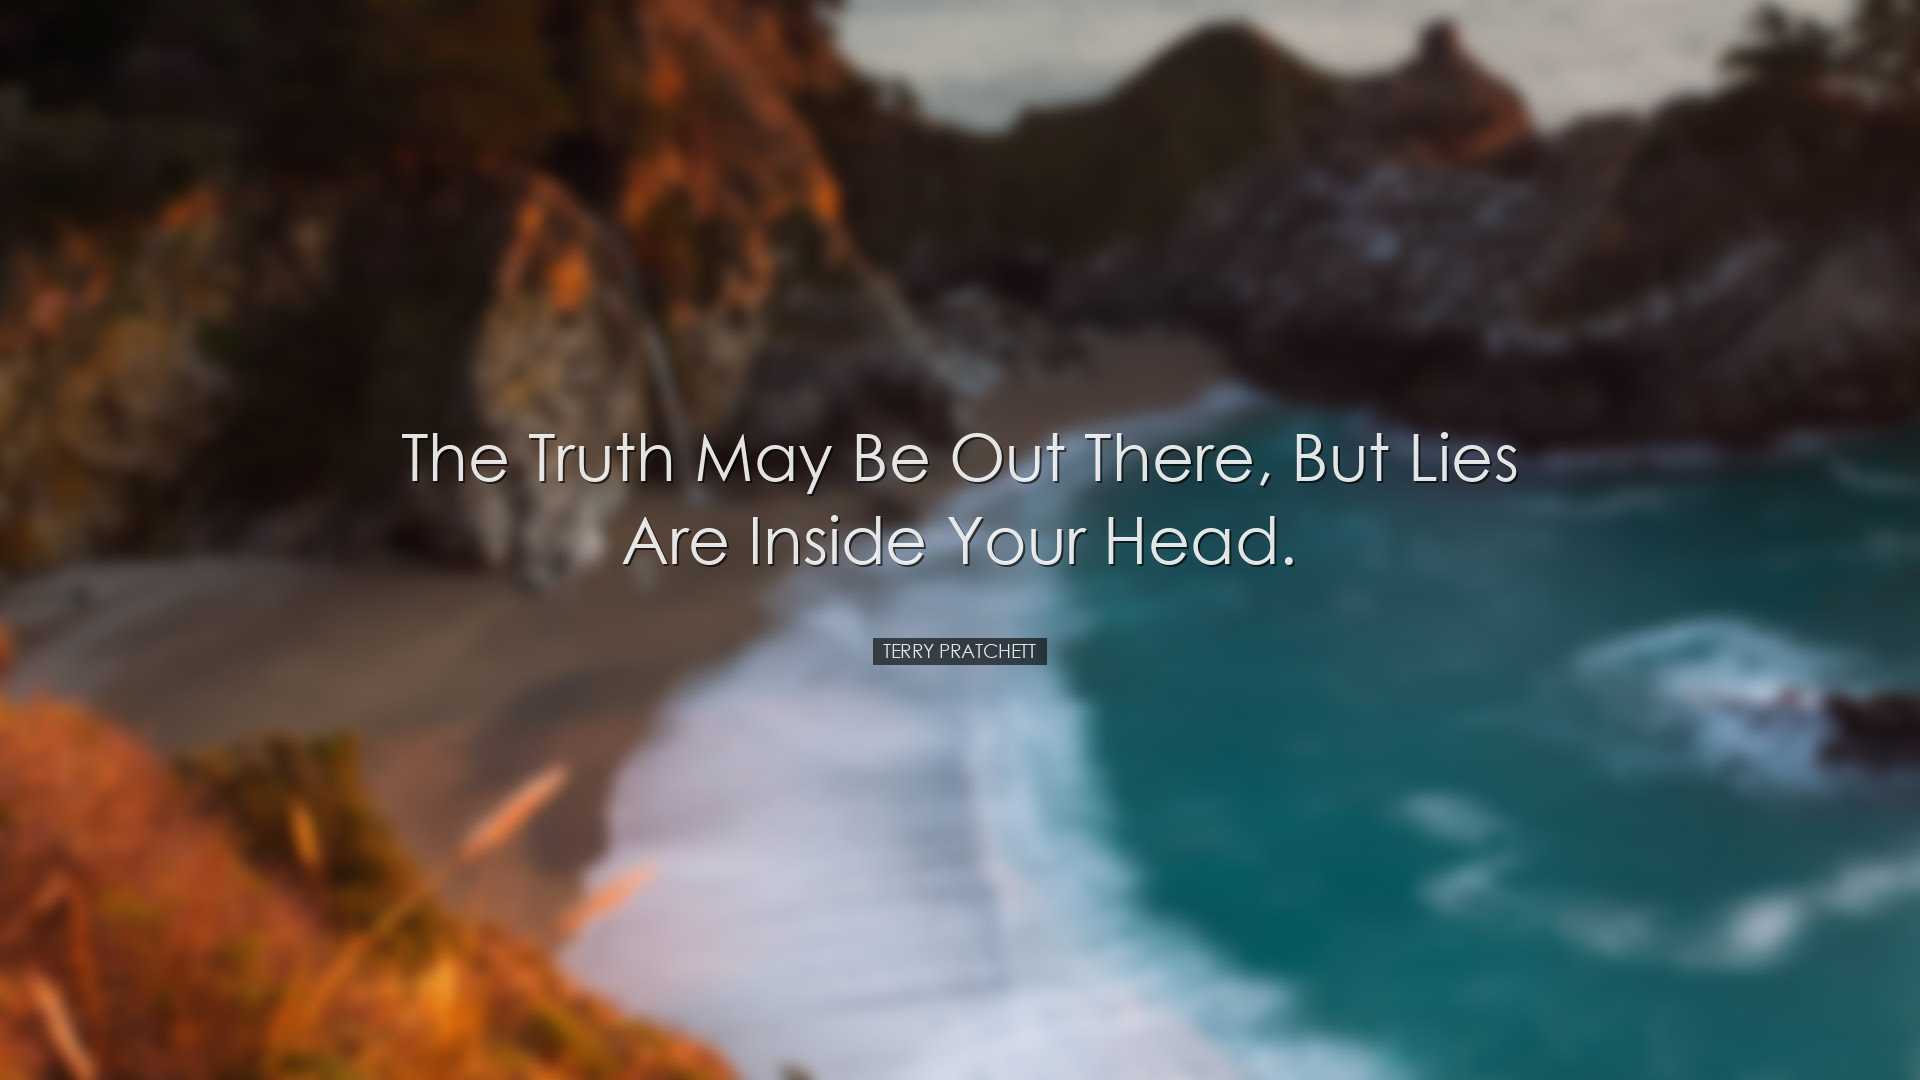 The truth may be out there, but lies are inside your head. - Terry